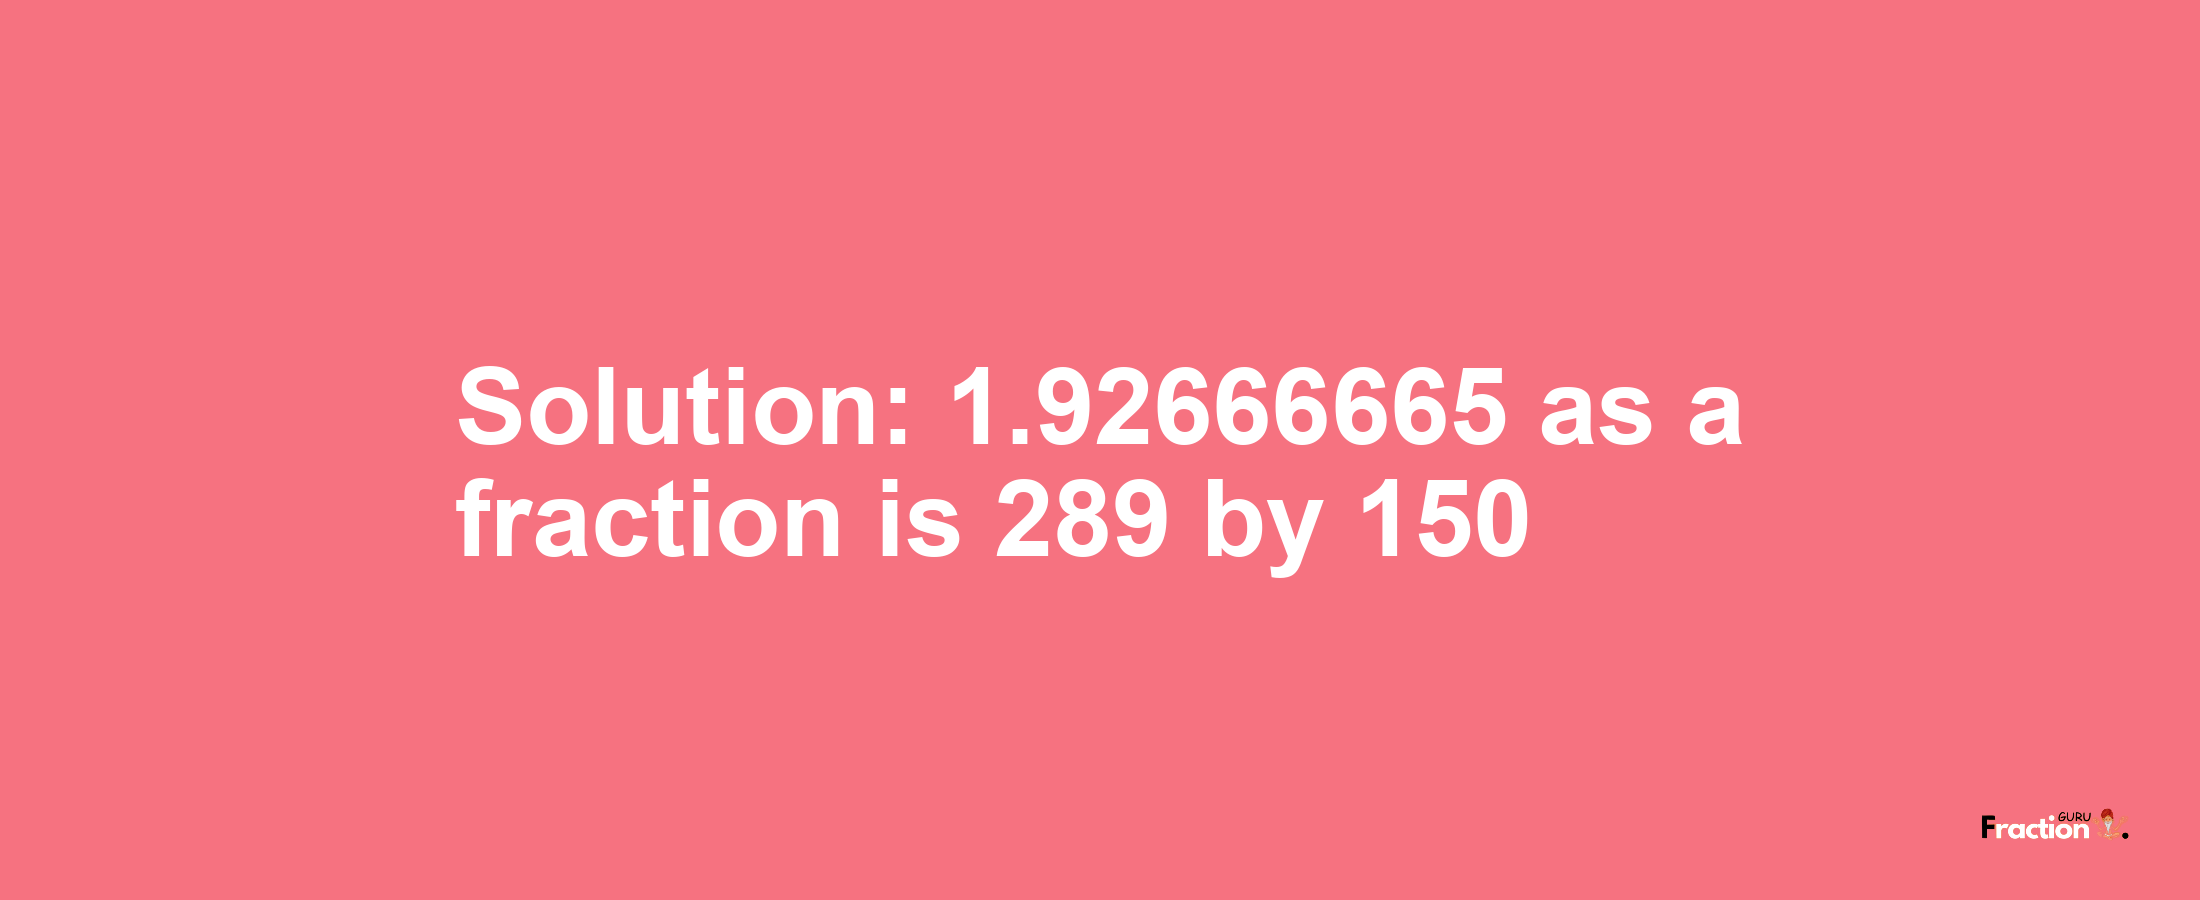 Solution:1.92666665 as a fraction is 289/150